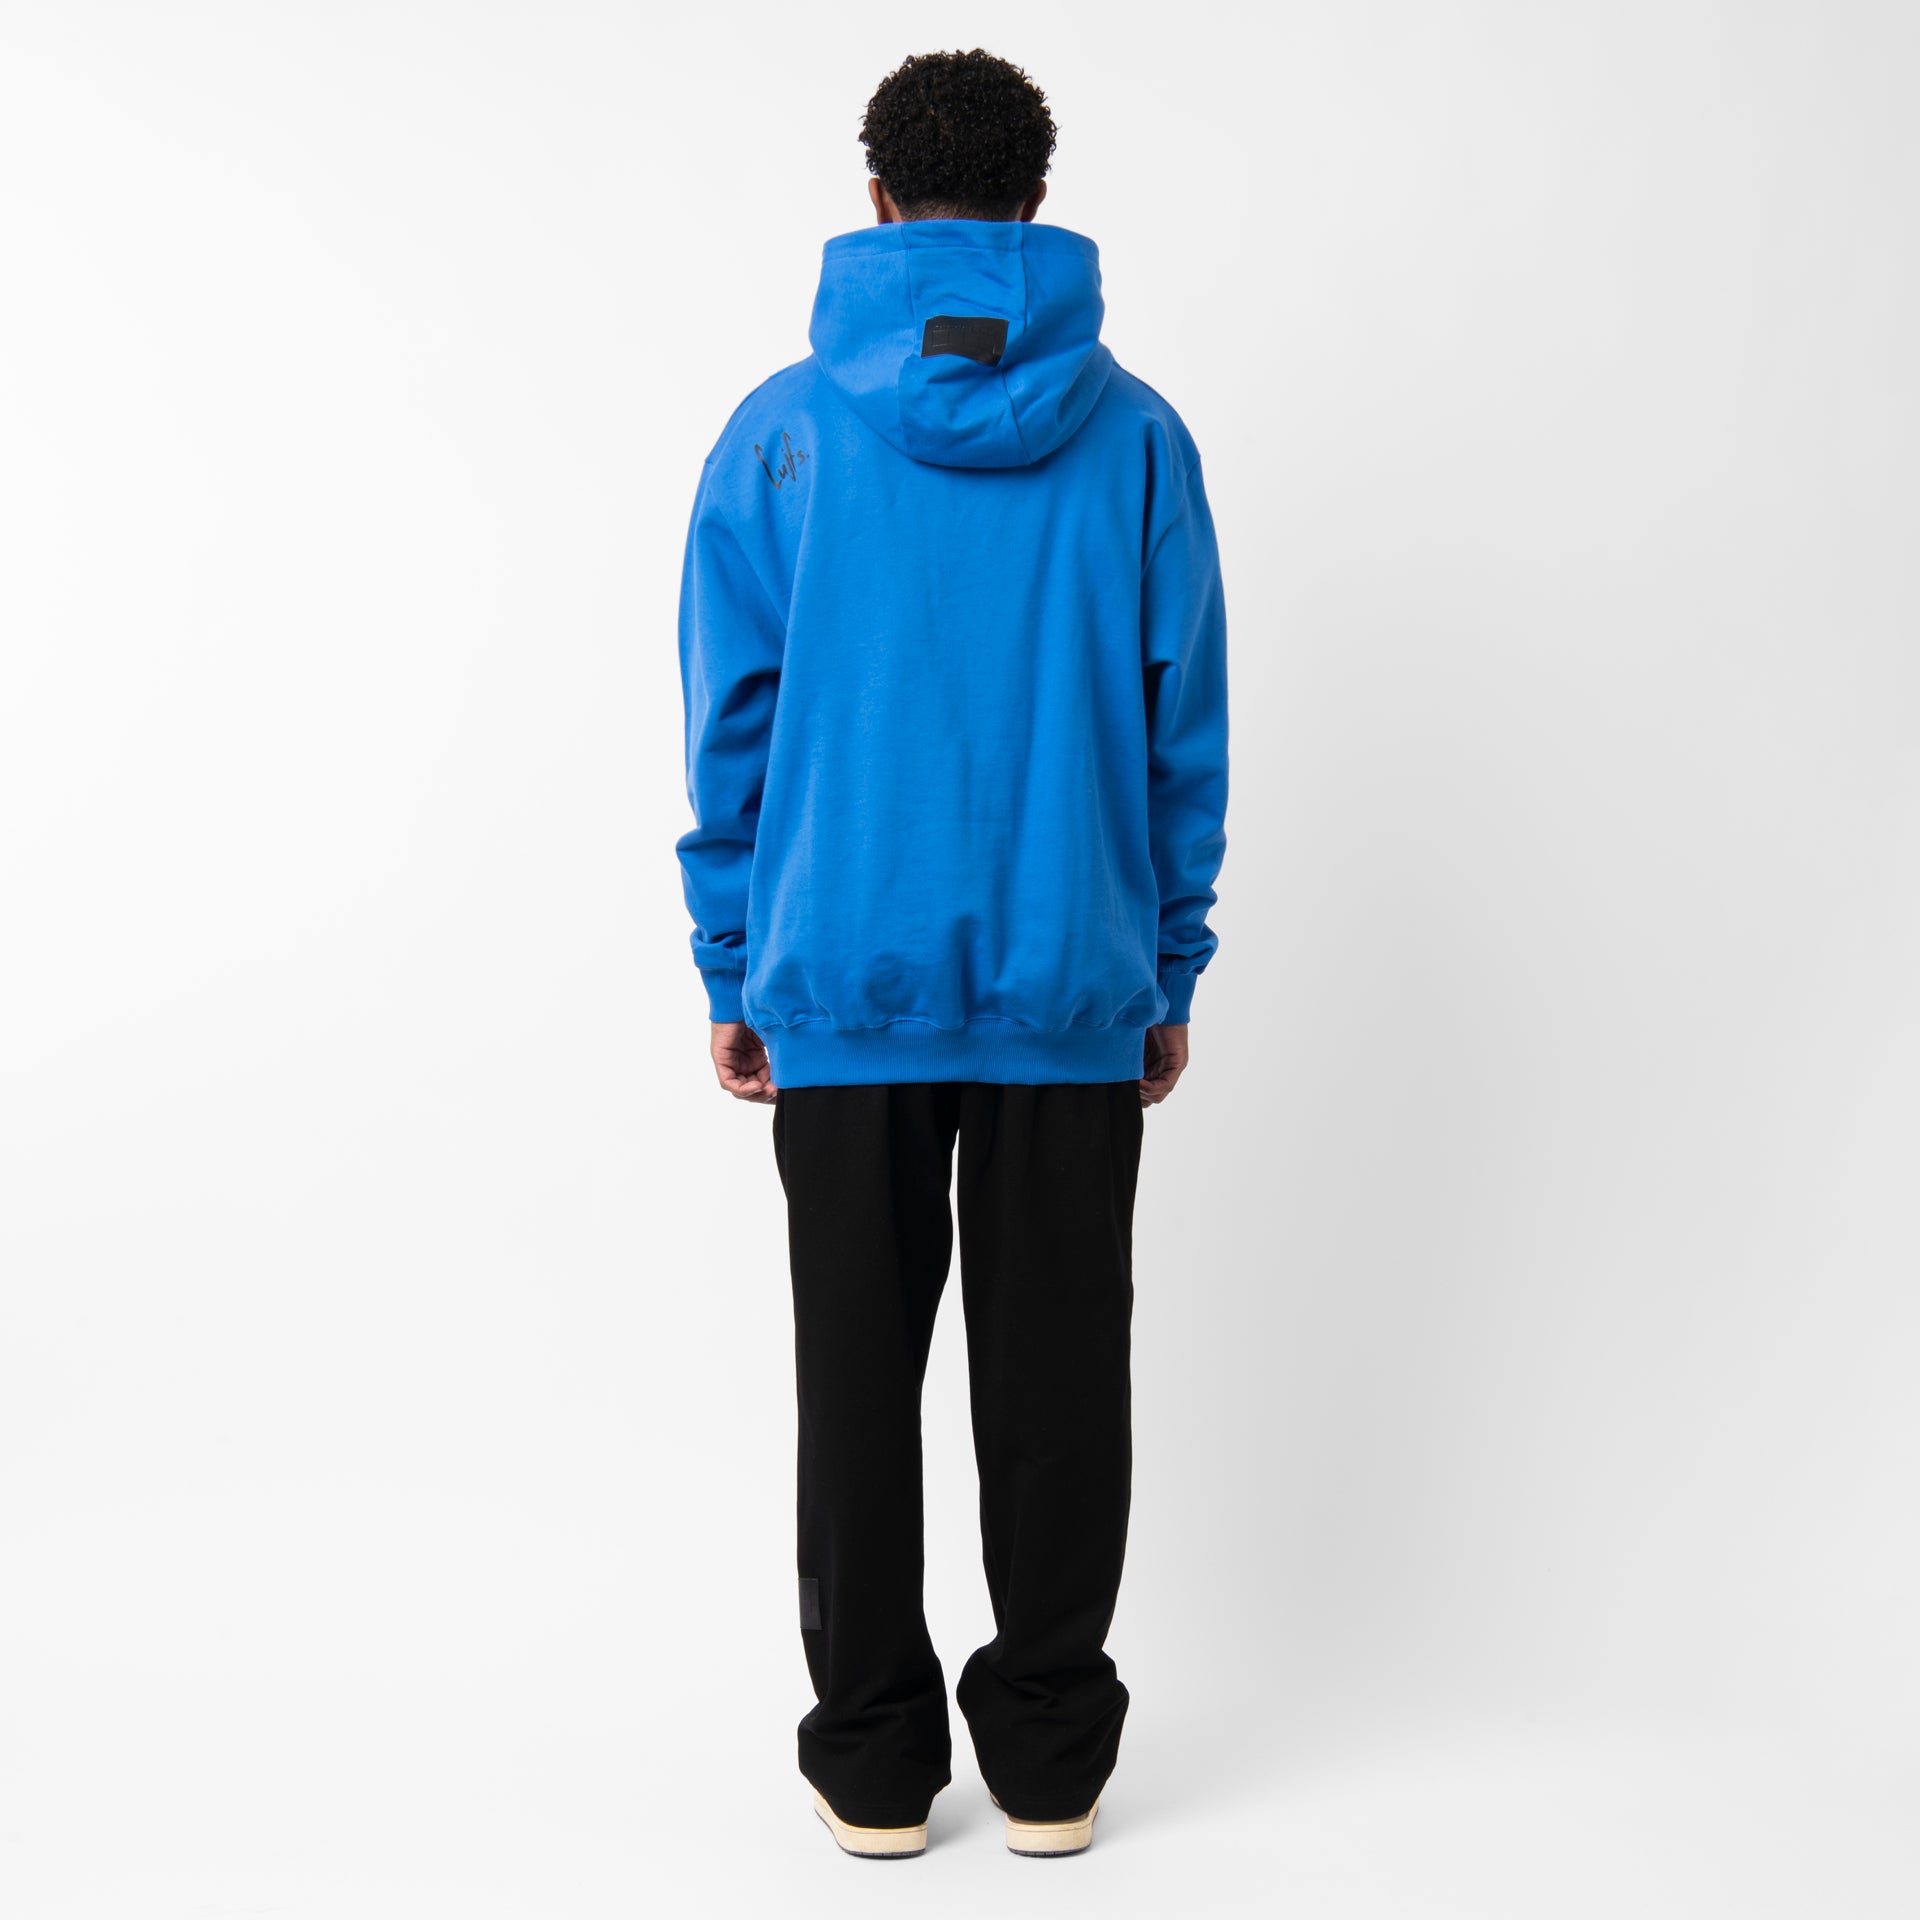 Blue Hoodie From Triple Four